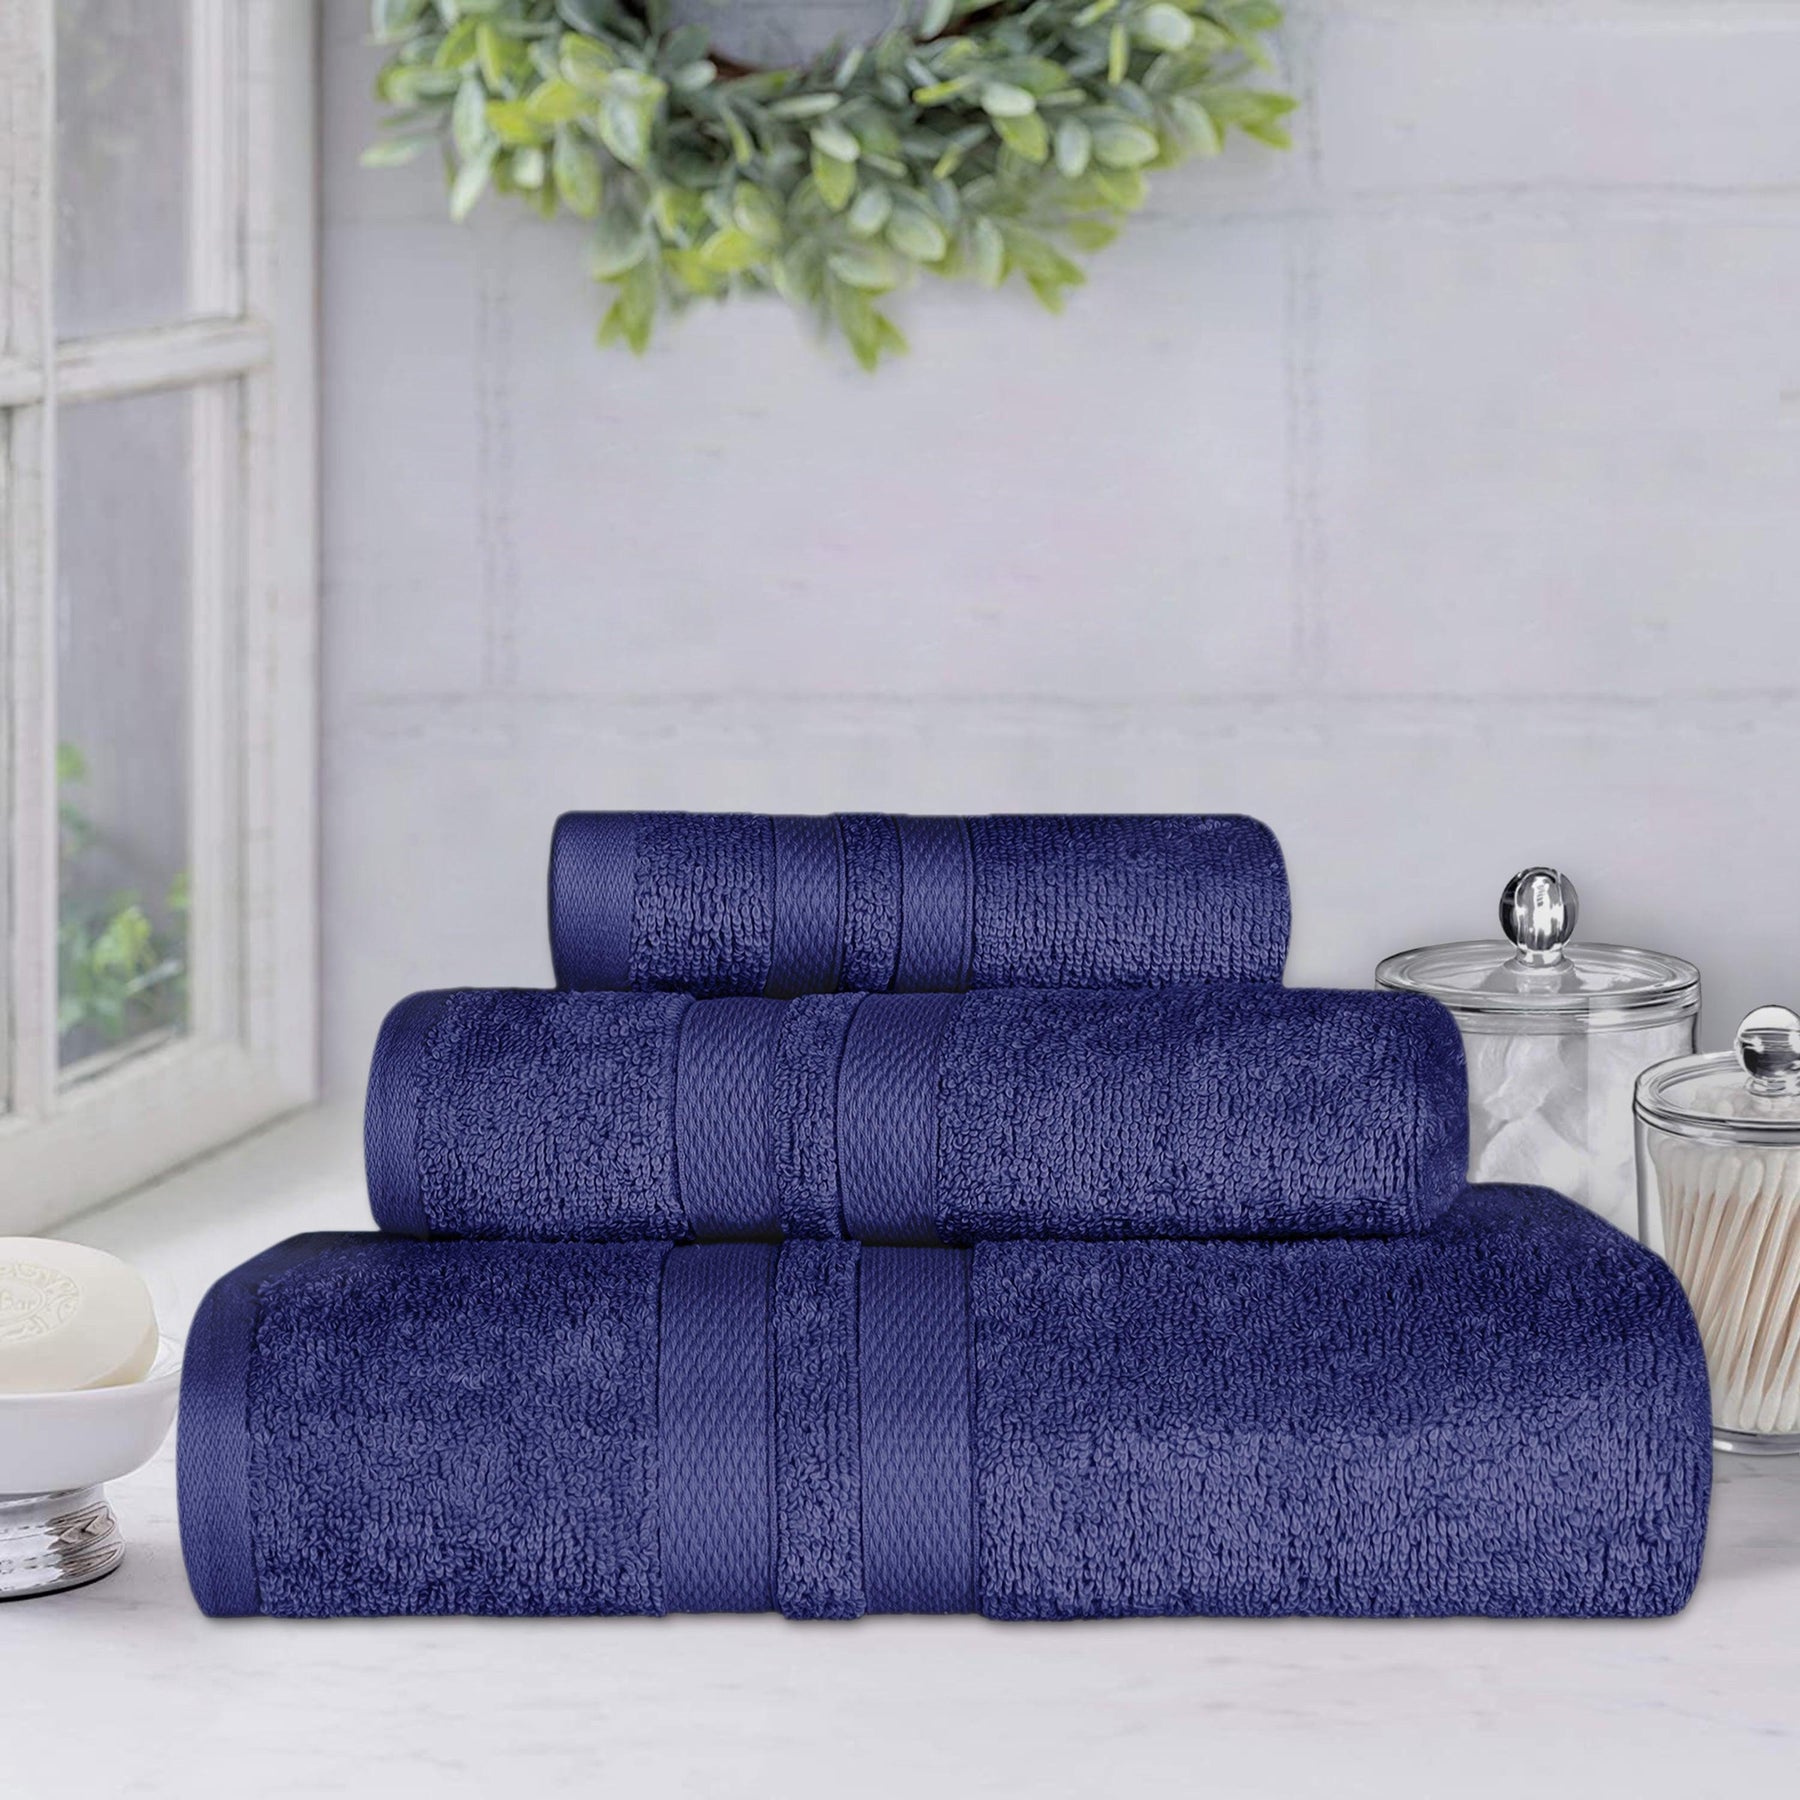 Superior Ultra Soft Cotton Absorbent Solid Assorted 3-Piece Towel Set - Navy Blue